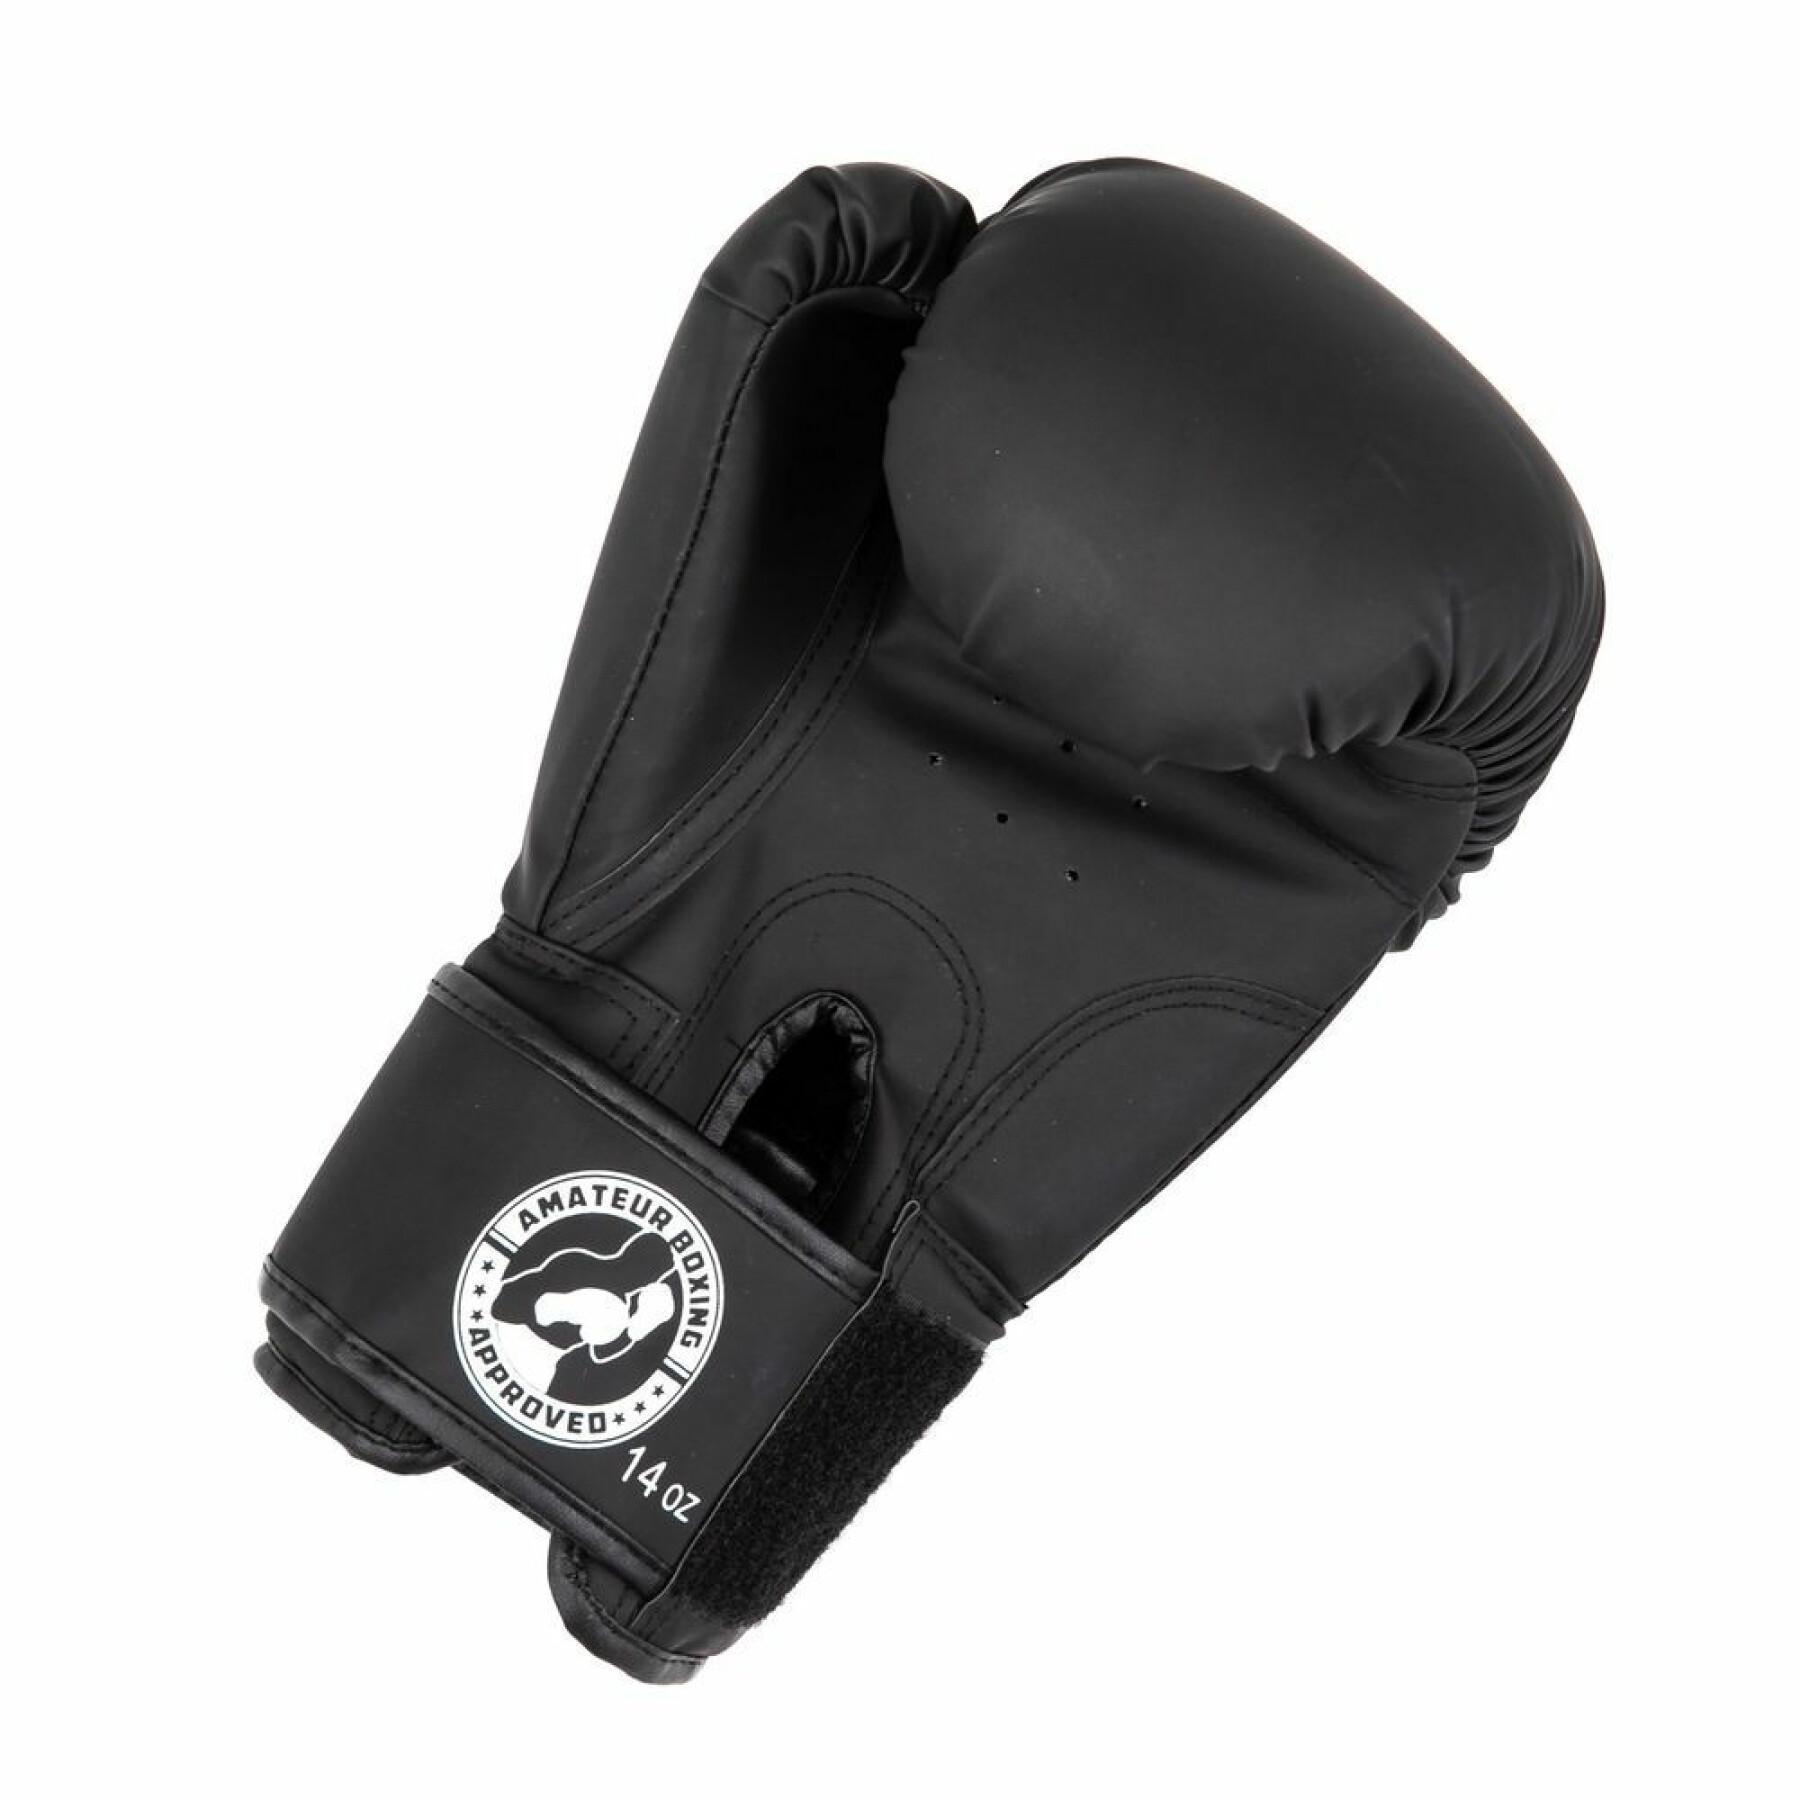 Boxhandschuhe Booster Fight Gear Approved